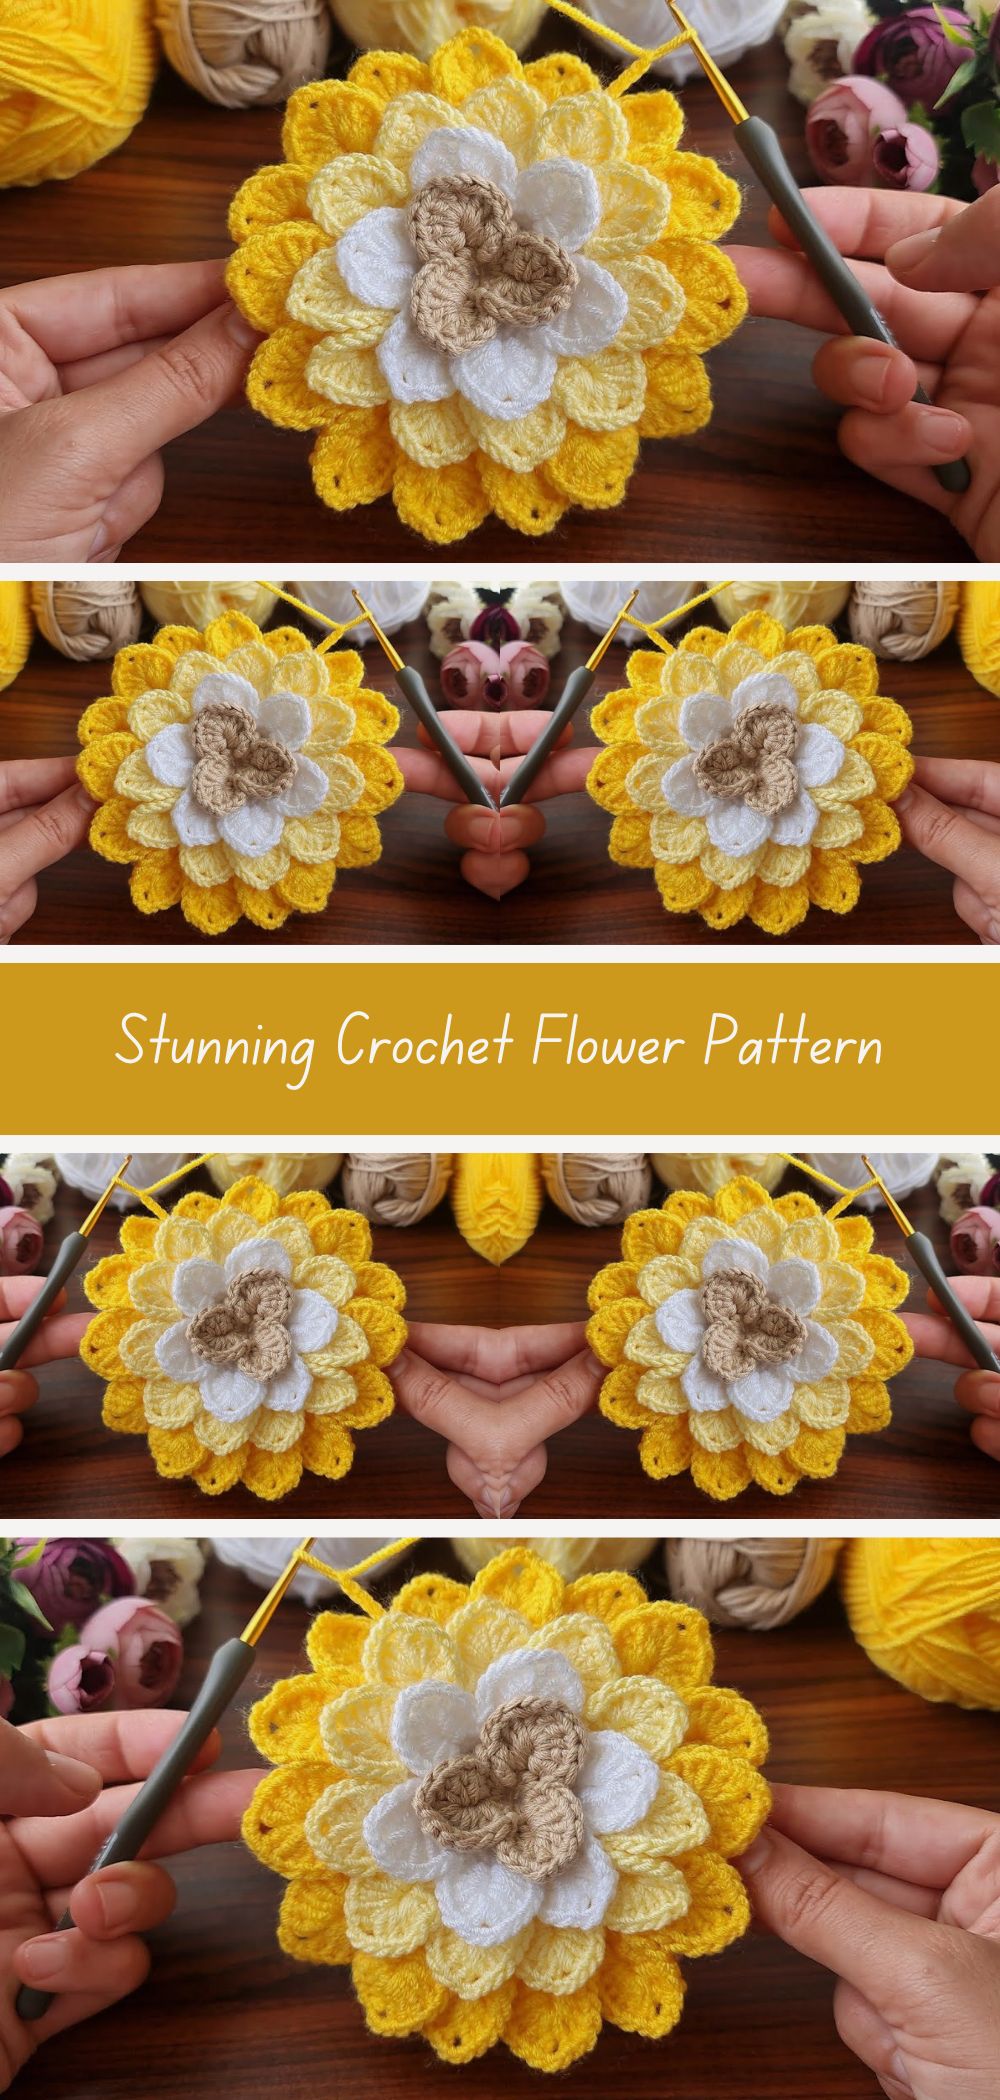 Stunning Crochet Flower Pattern - Create breathtaking crochet flowers with this intricate and beautiful pattern